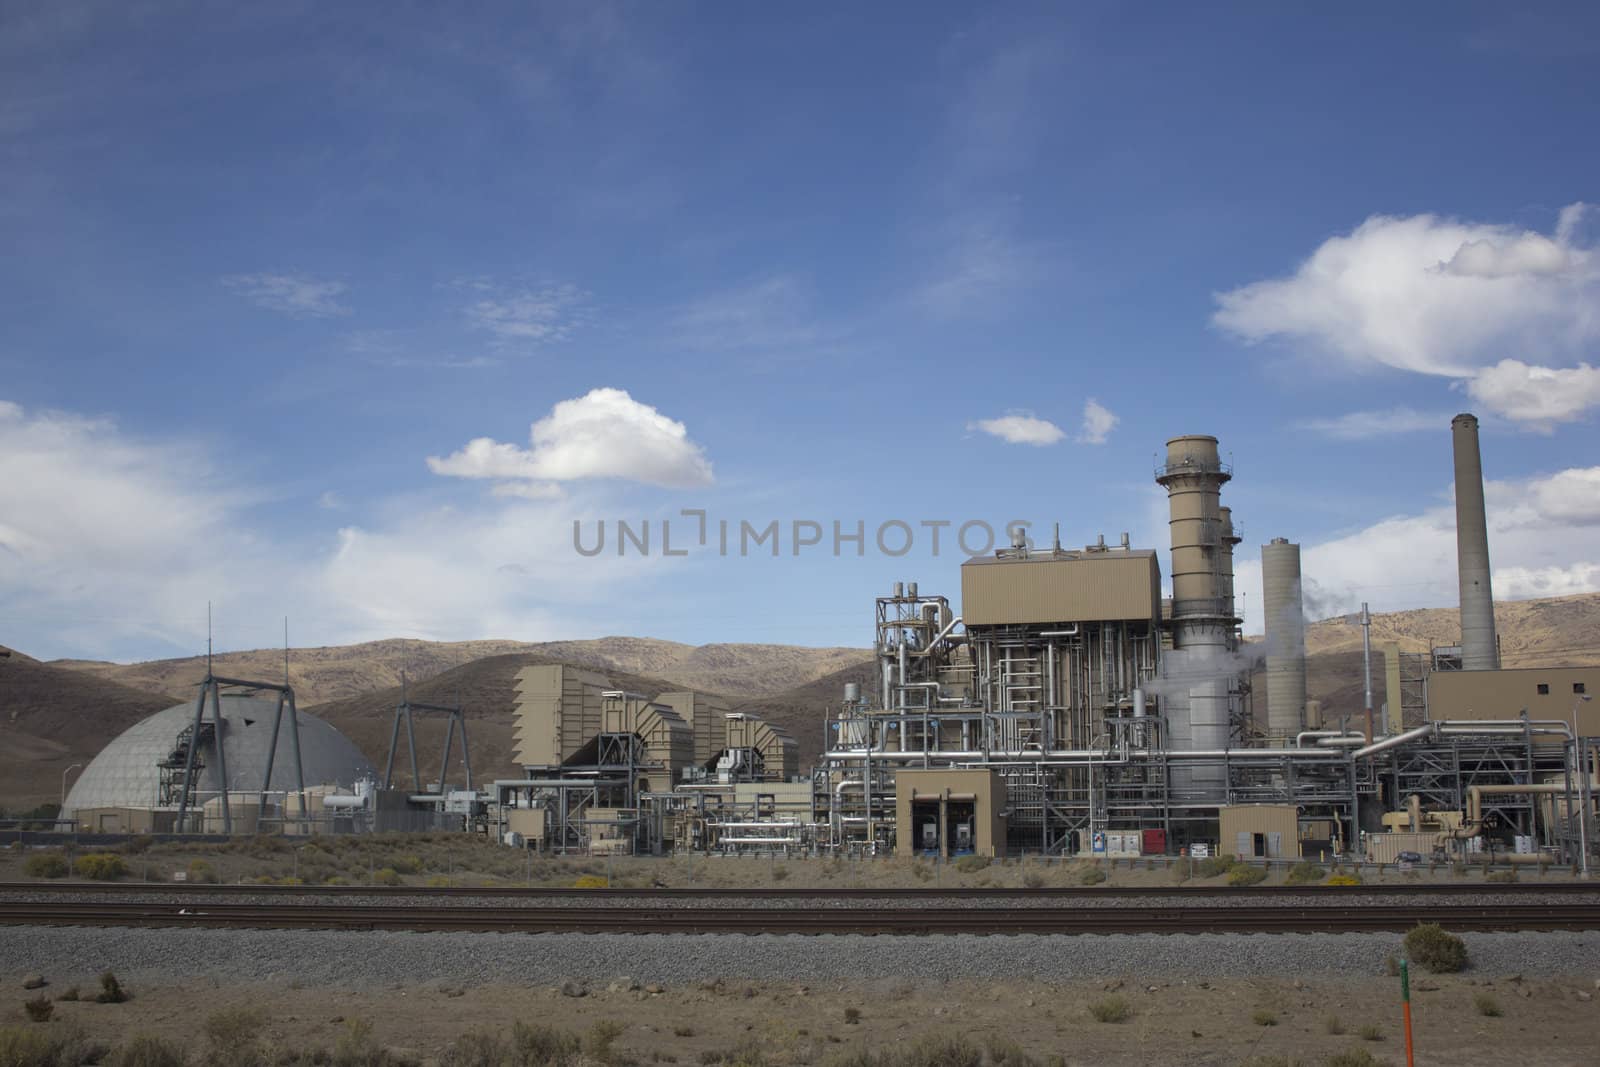 Power plant factory next to train track in the desert with blue cloudy skies